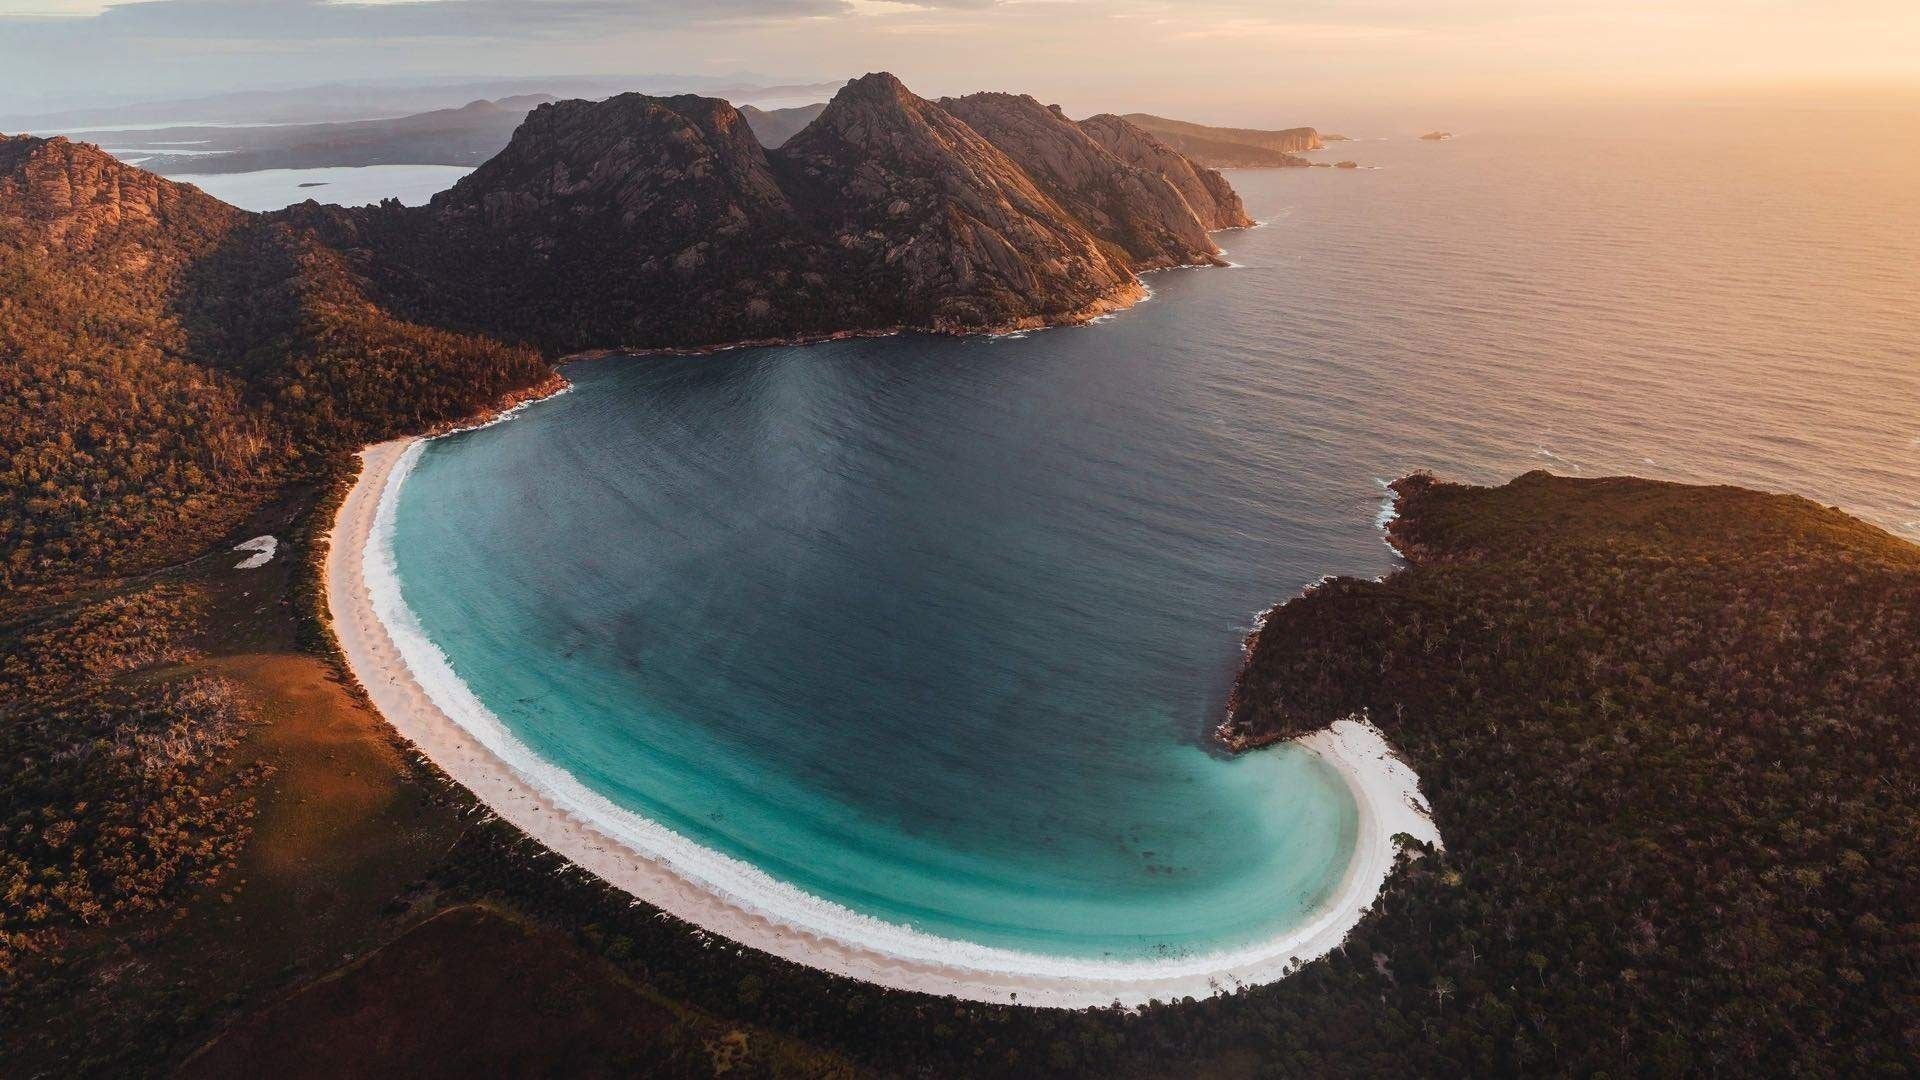 Wineglass Bay - one of the best beaches in Tasmania